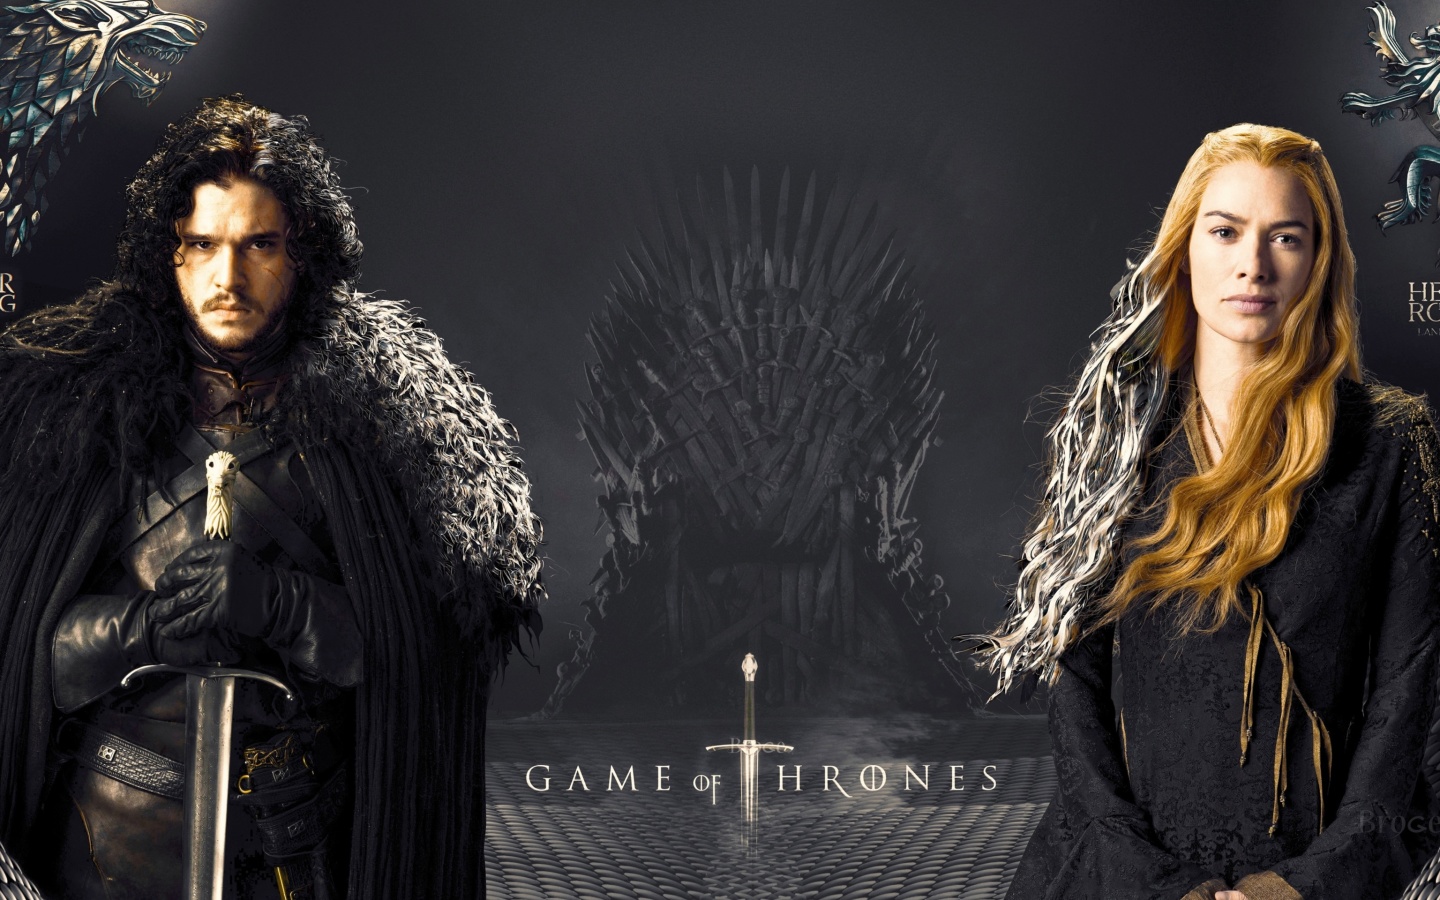 Game Of Thrones actors Jon Snow and Cersei Lannister wallpaper 1440x900